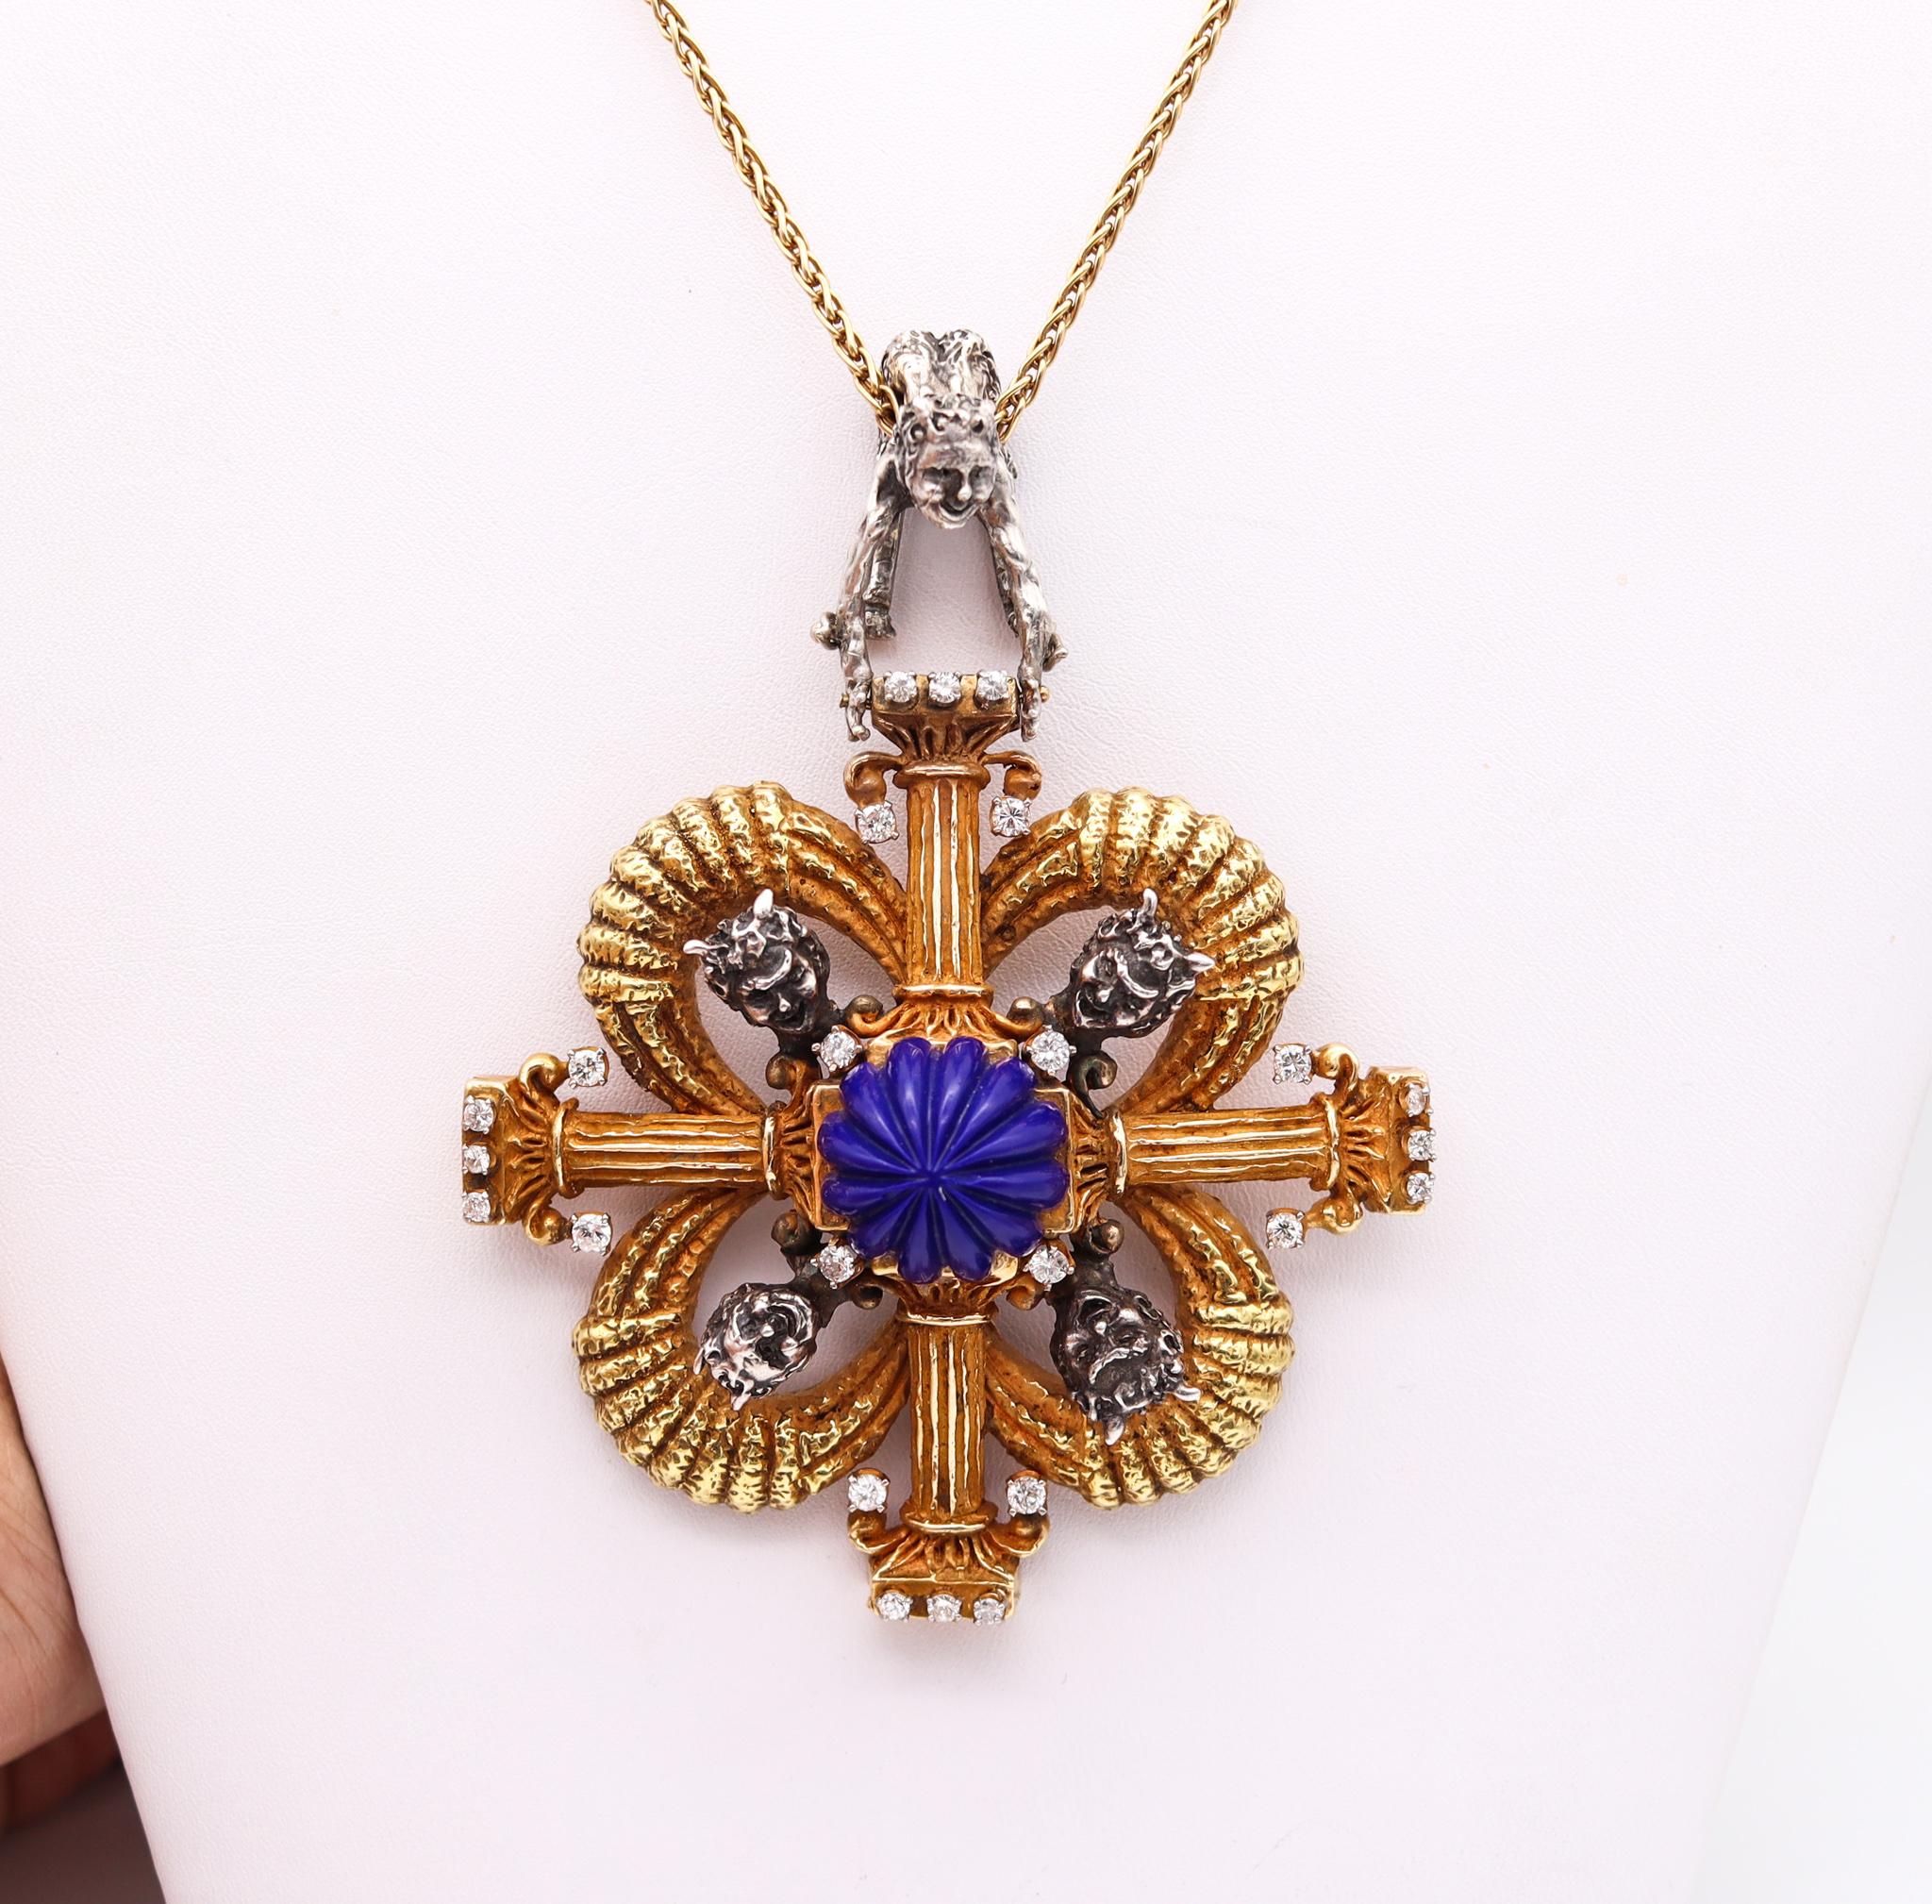 Erwin Pearl 1970 Renaissance Revival Pendant in 18Kt Gold with 31.94 Ctw in Gems 3